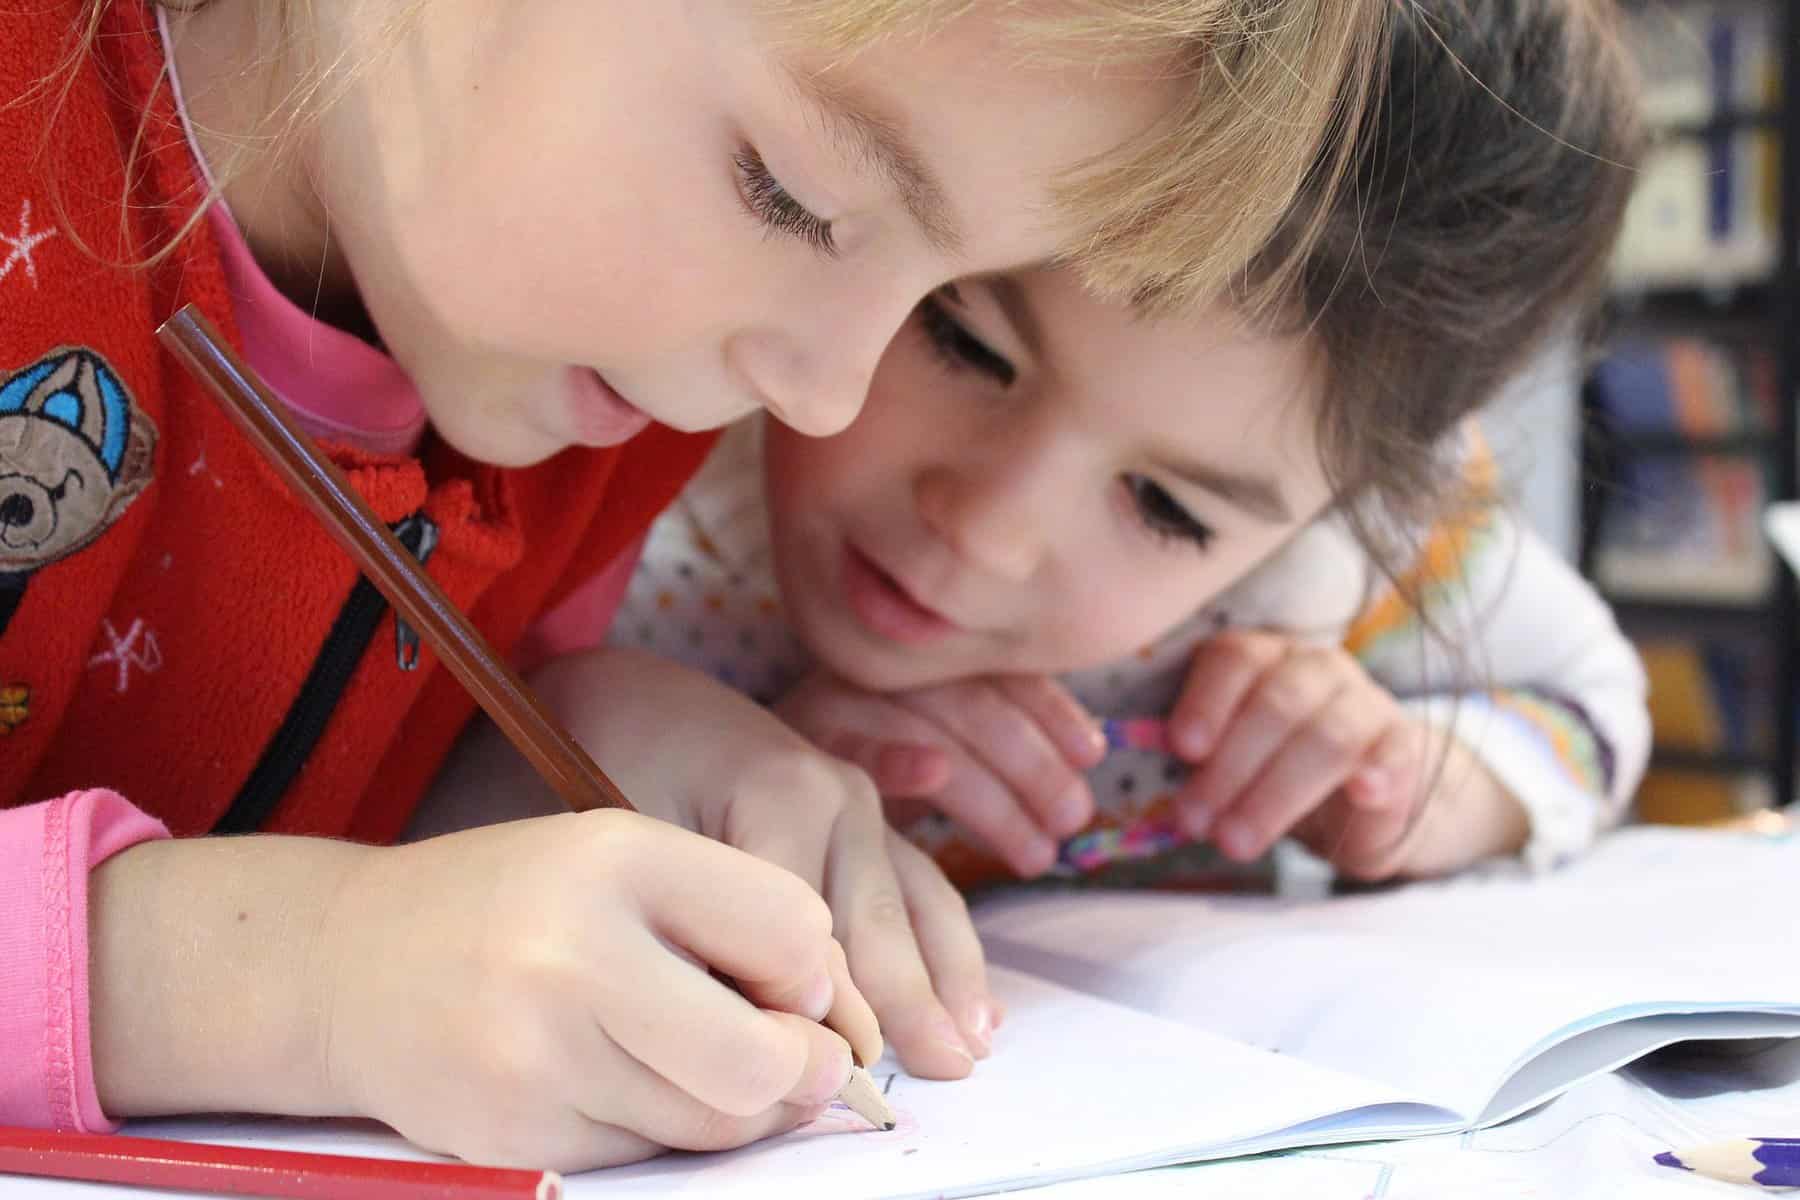 Two children are shown close up and working on writing something.